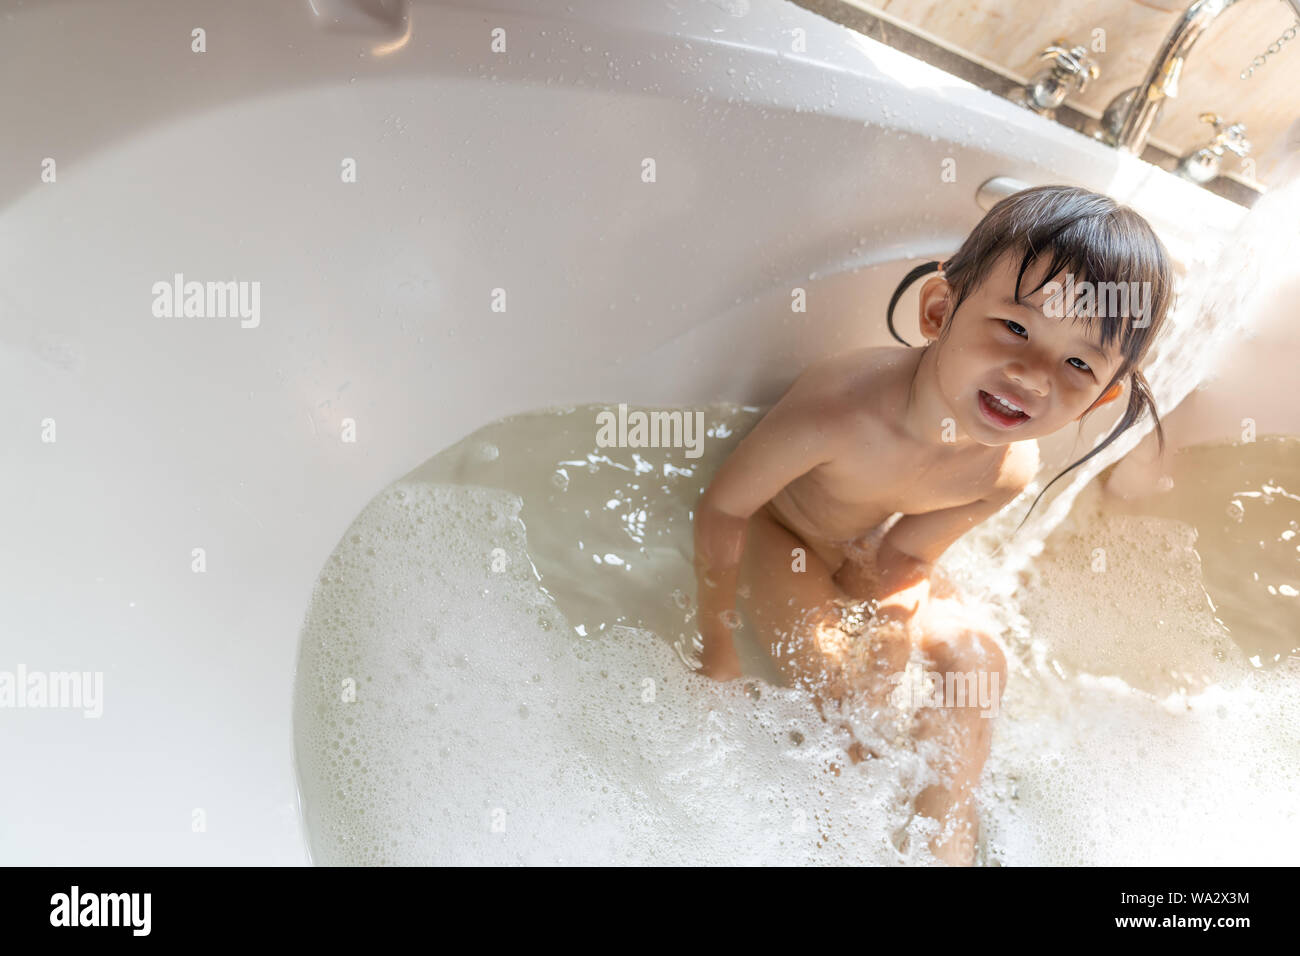 Asian happy laughing kid girl taking a bath playing with foam bubbles. Little child in a bathtub. Smiling kid in bathroom with sunlight window backgro Stock Photo